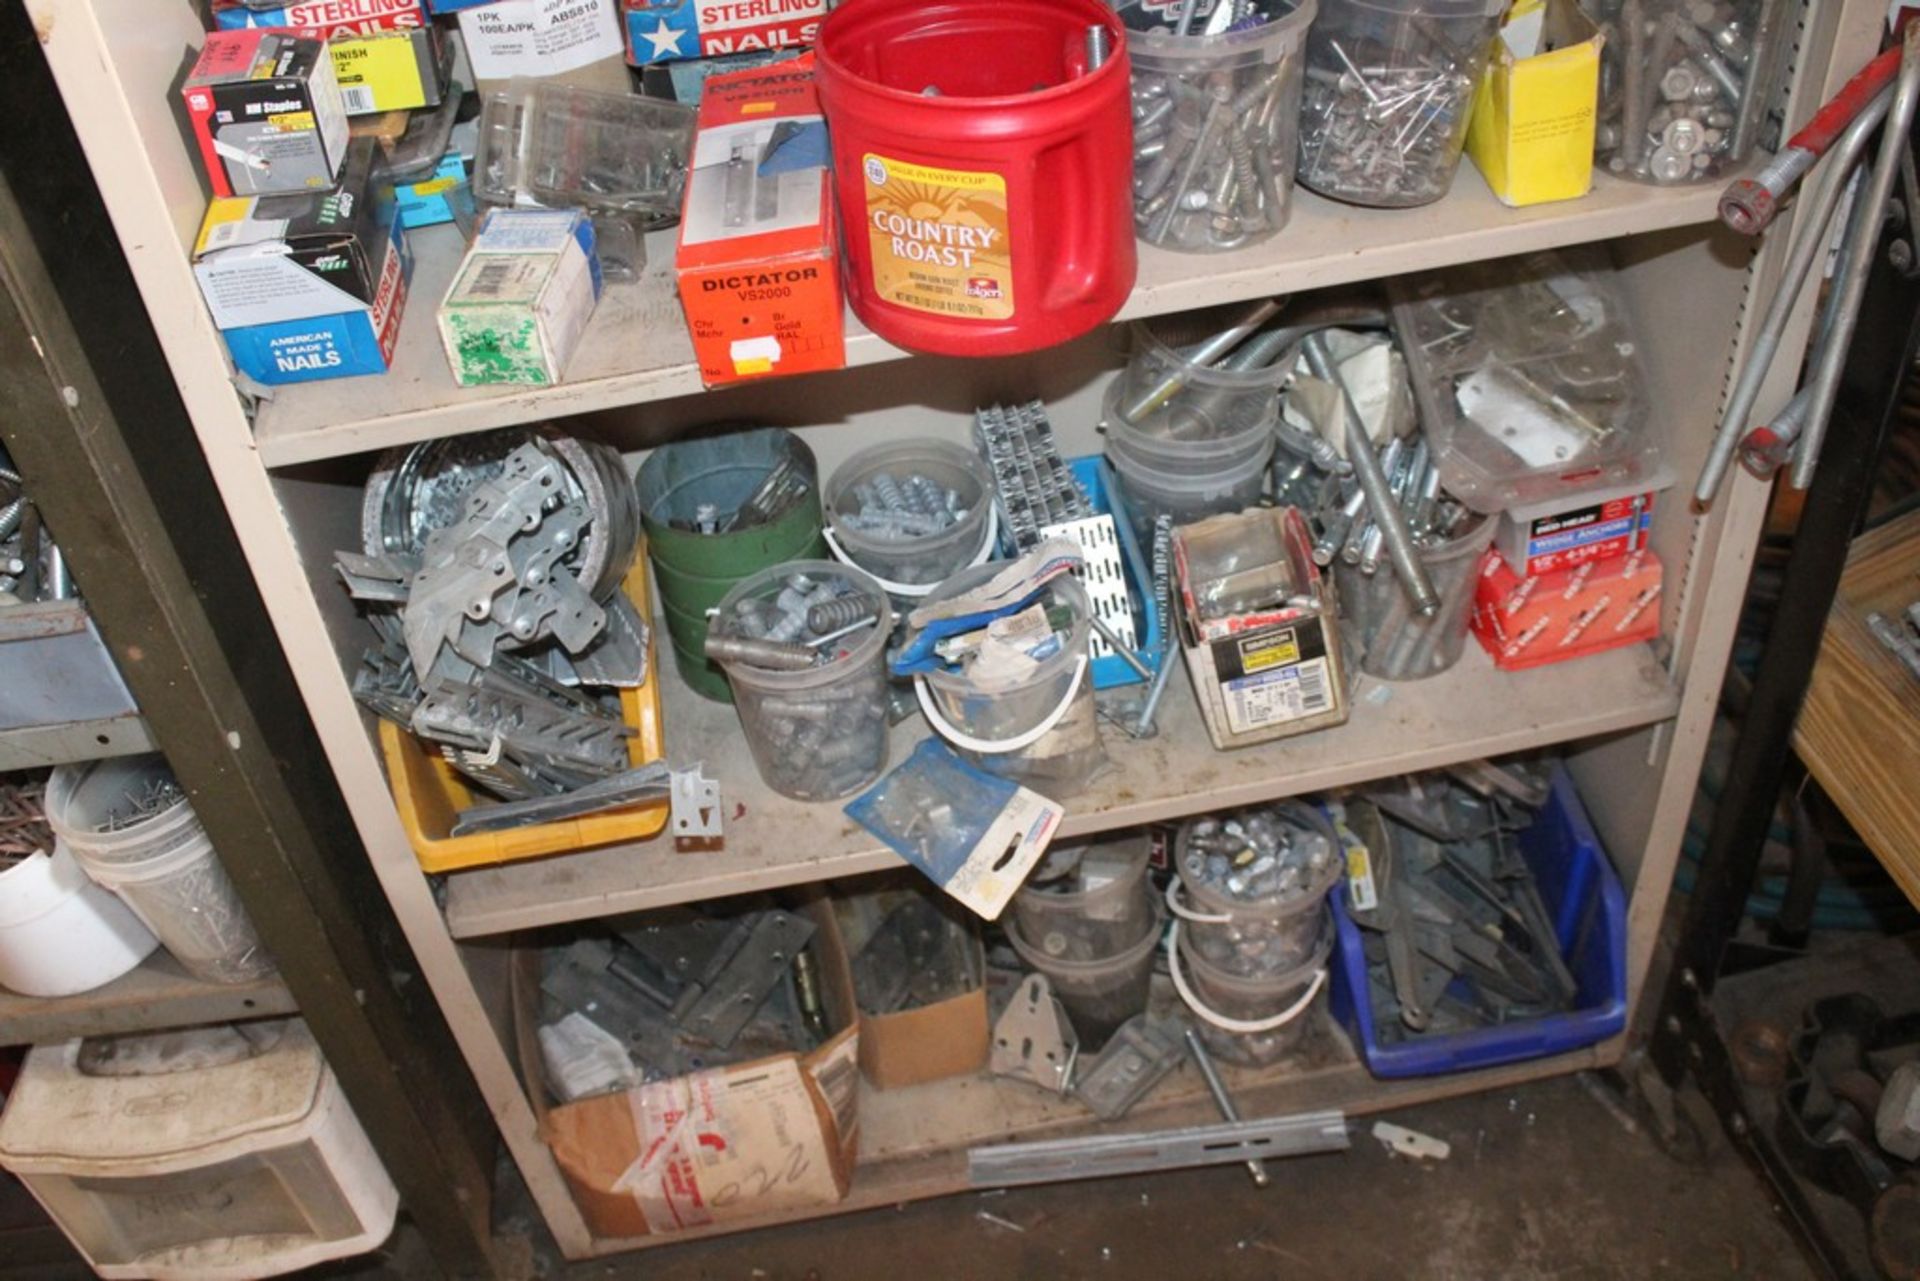 ASSORTED HARDWARE ON (3) SHELVES WTH STEEL SHELVING UNIT, 35" X 13" X 47" - Image 3 of 3